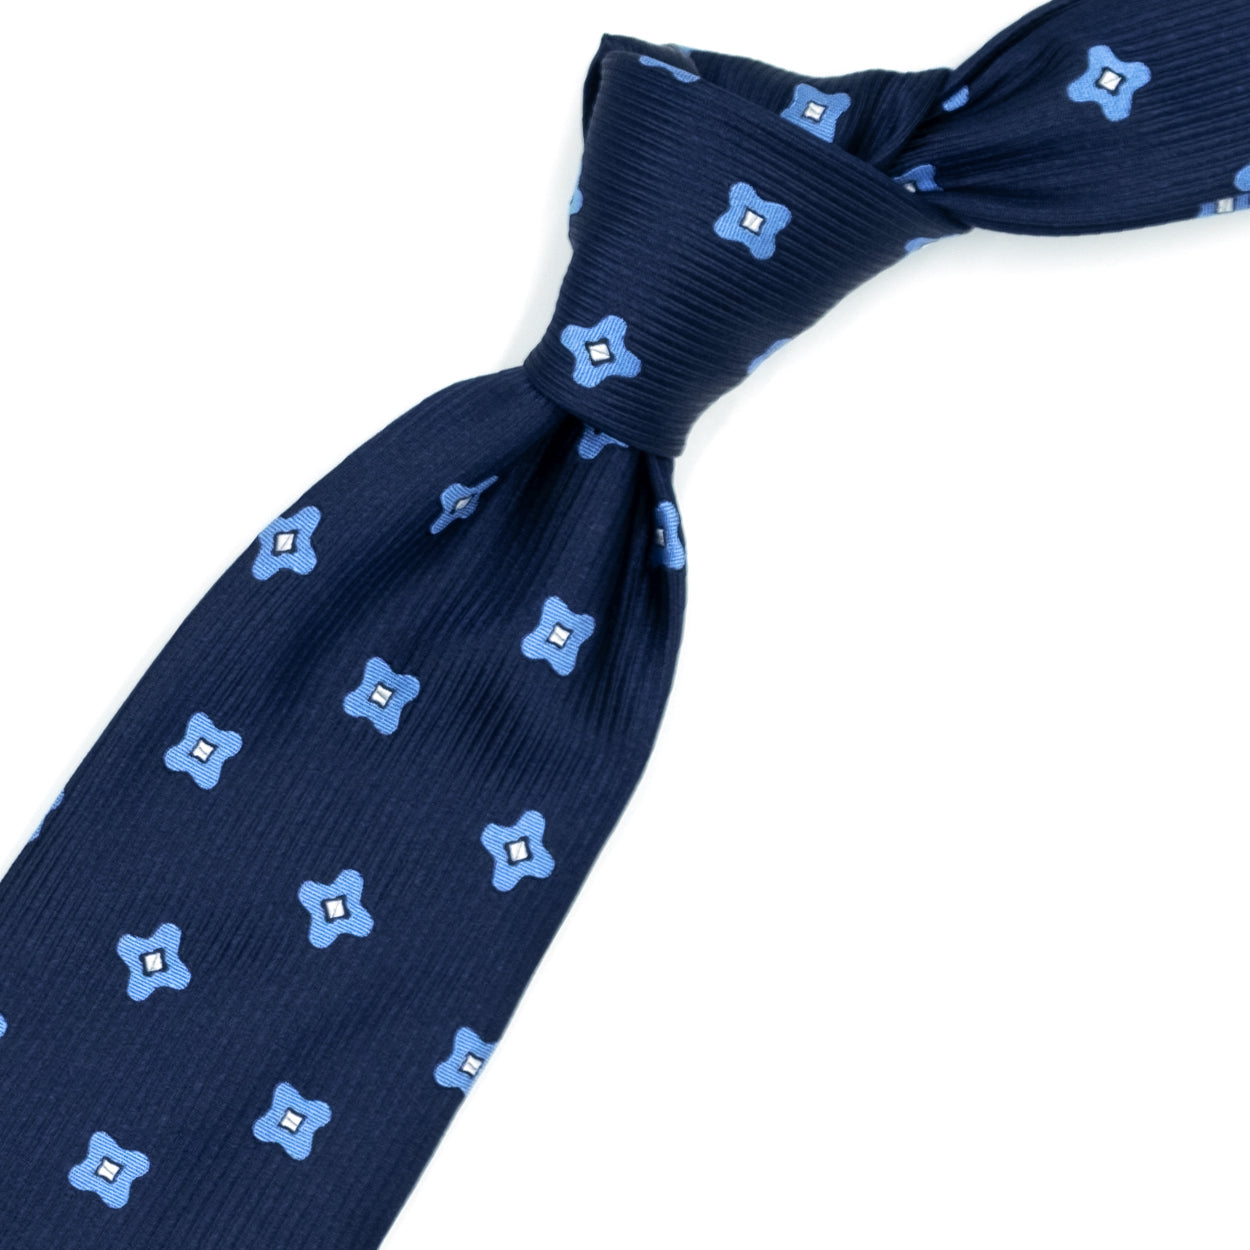 Blue tie with blue flowers and white squares